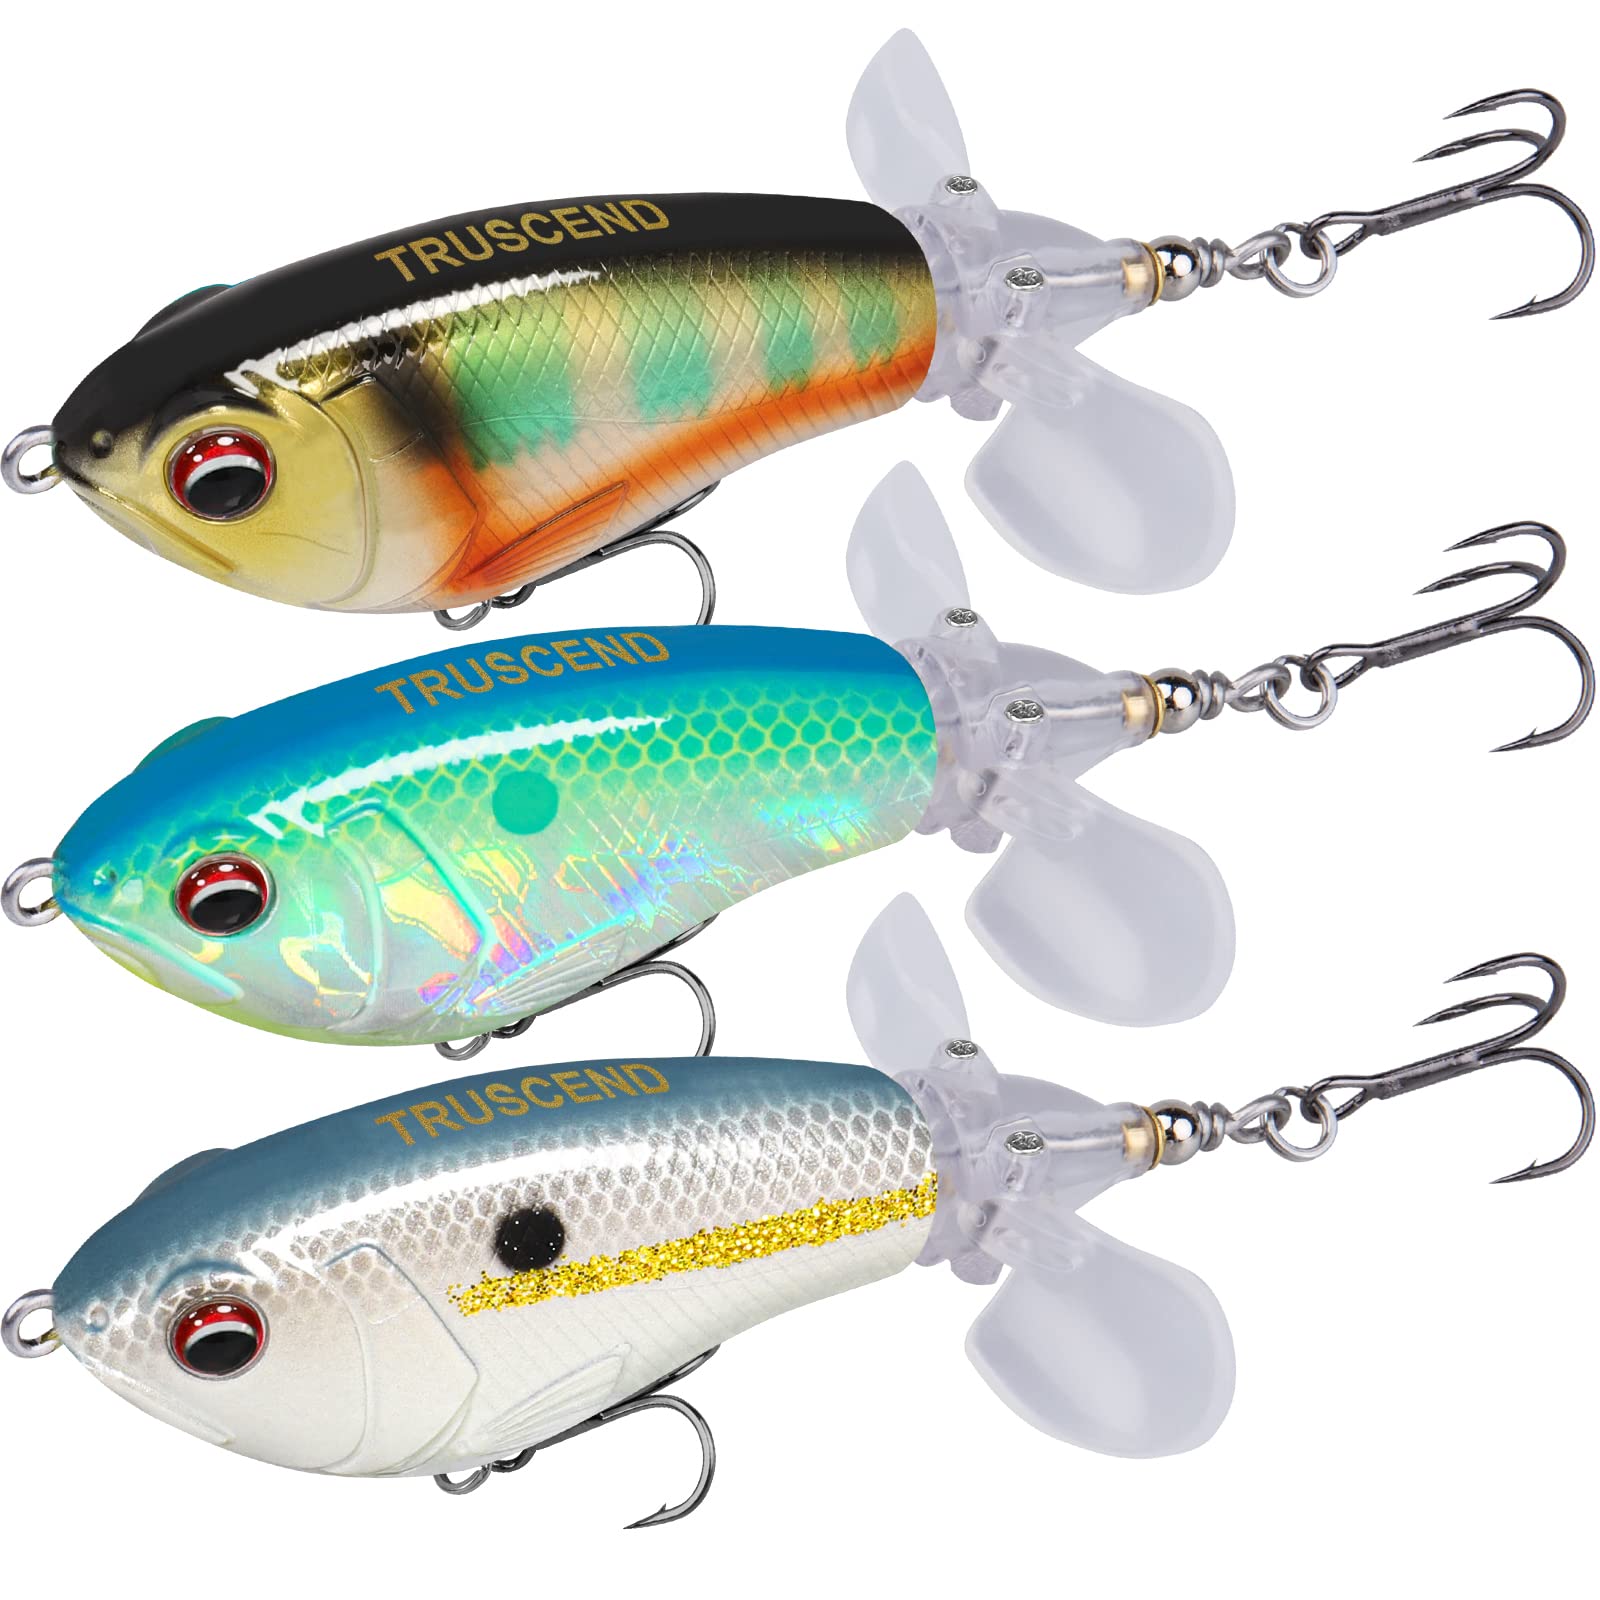 🐟Whopper Plopper Topwater Floating Fishing Lures Rotating Tail for Bass  Pike🐟 